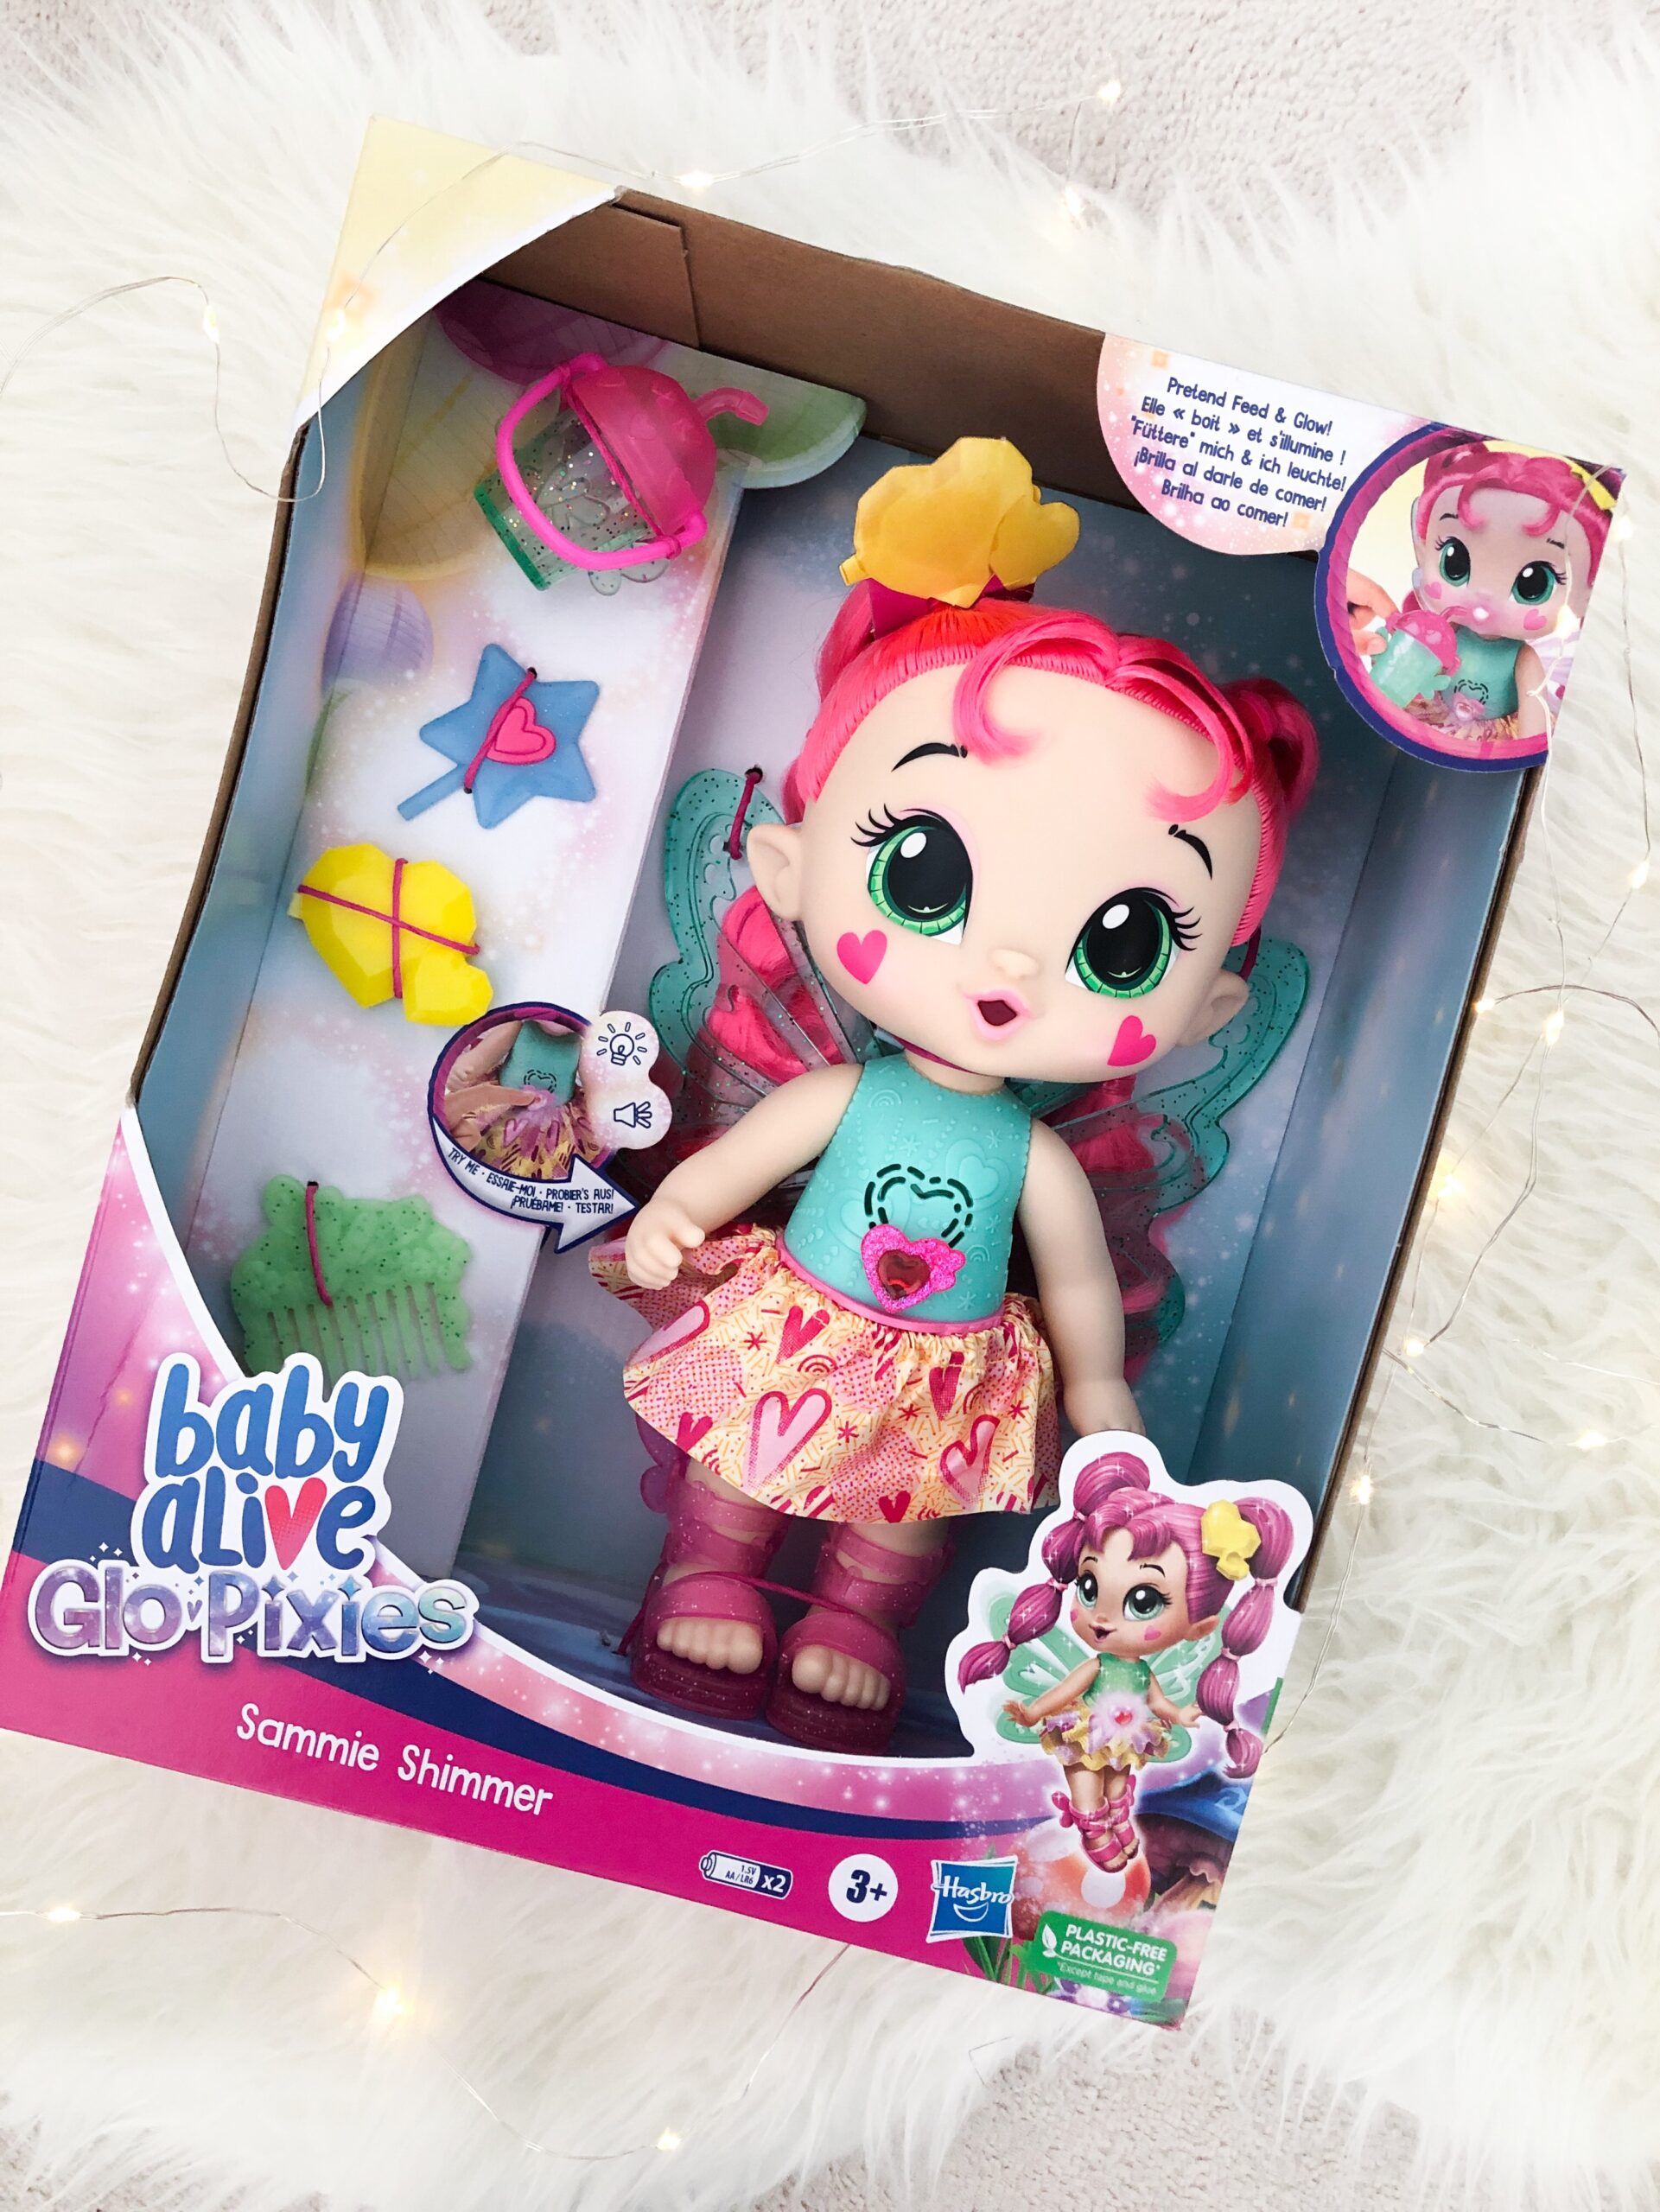 Hasbro Gift Guide for Kids on livin' Life with Style- baby alive